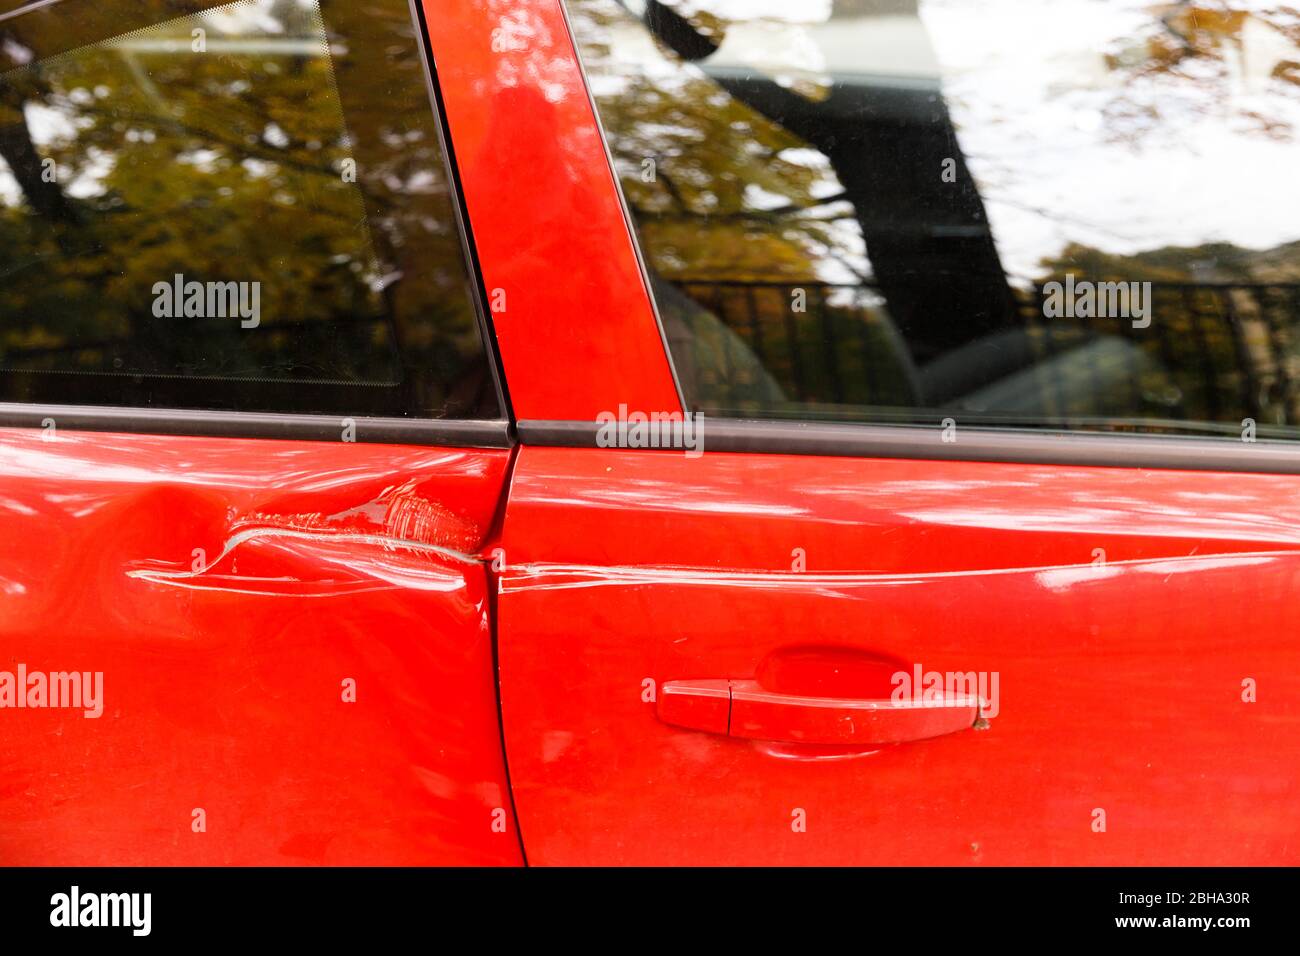 Door red car damaged in a deep dent accident, scratches on the doors. Car repair concept. Stock Photo